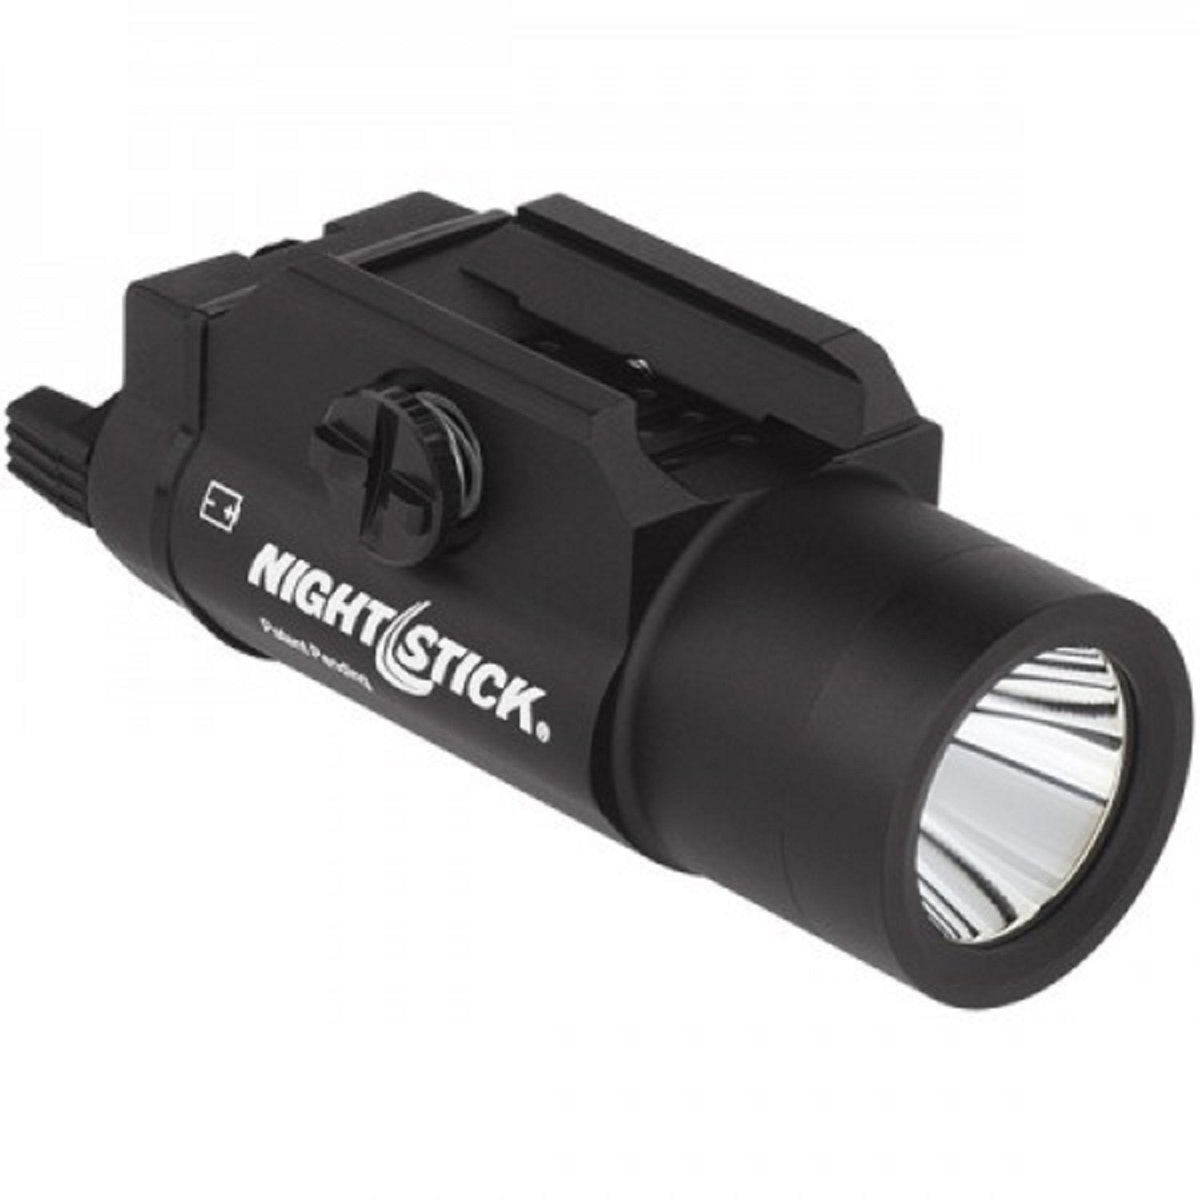 Nightstick Tactical Weapon-Mounted LED Light 350 lumens Flashlights and Lighting Nightstick Tactical Gear Supplier Tactical Distributors Australia